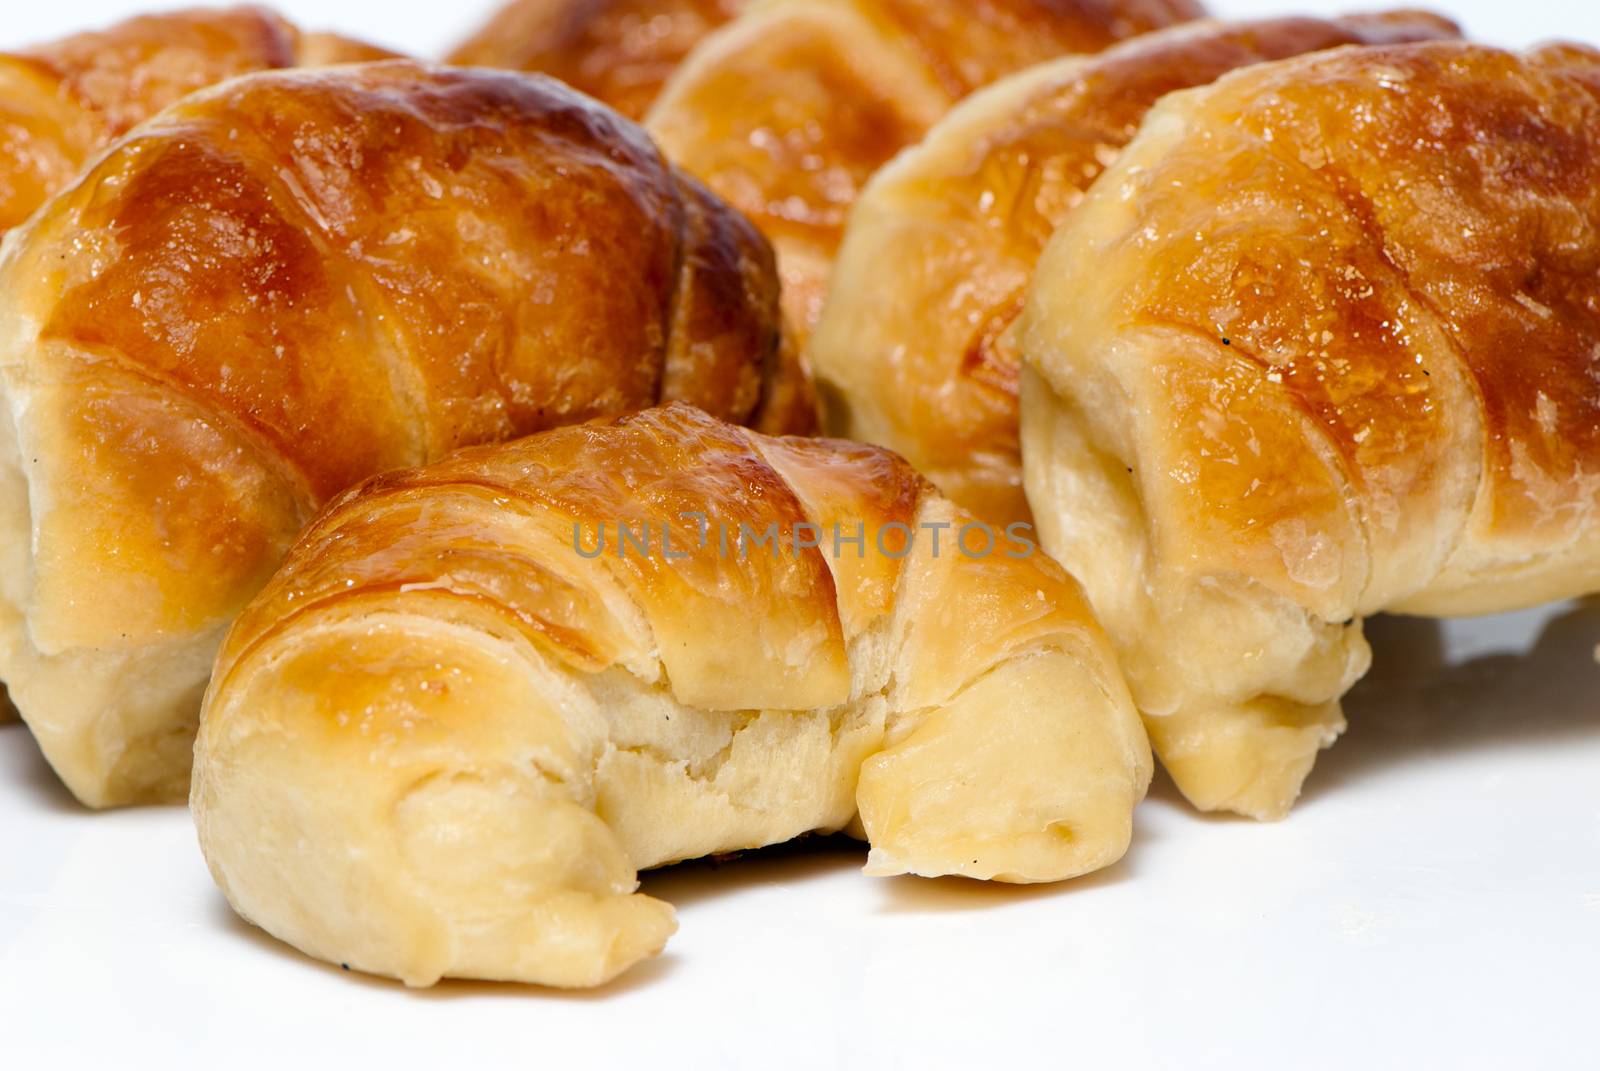 Croissant on a light background